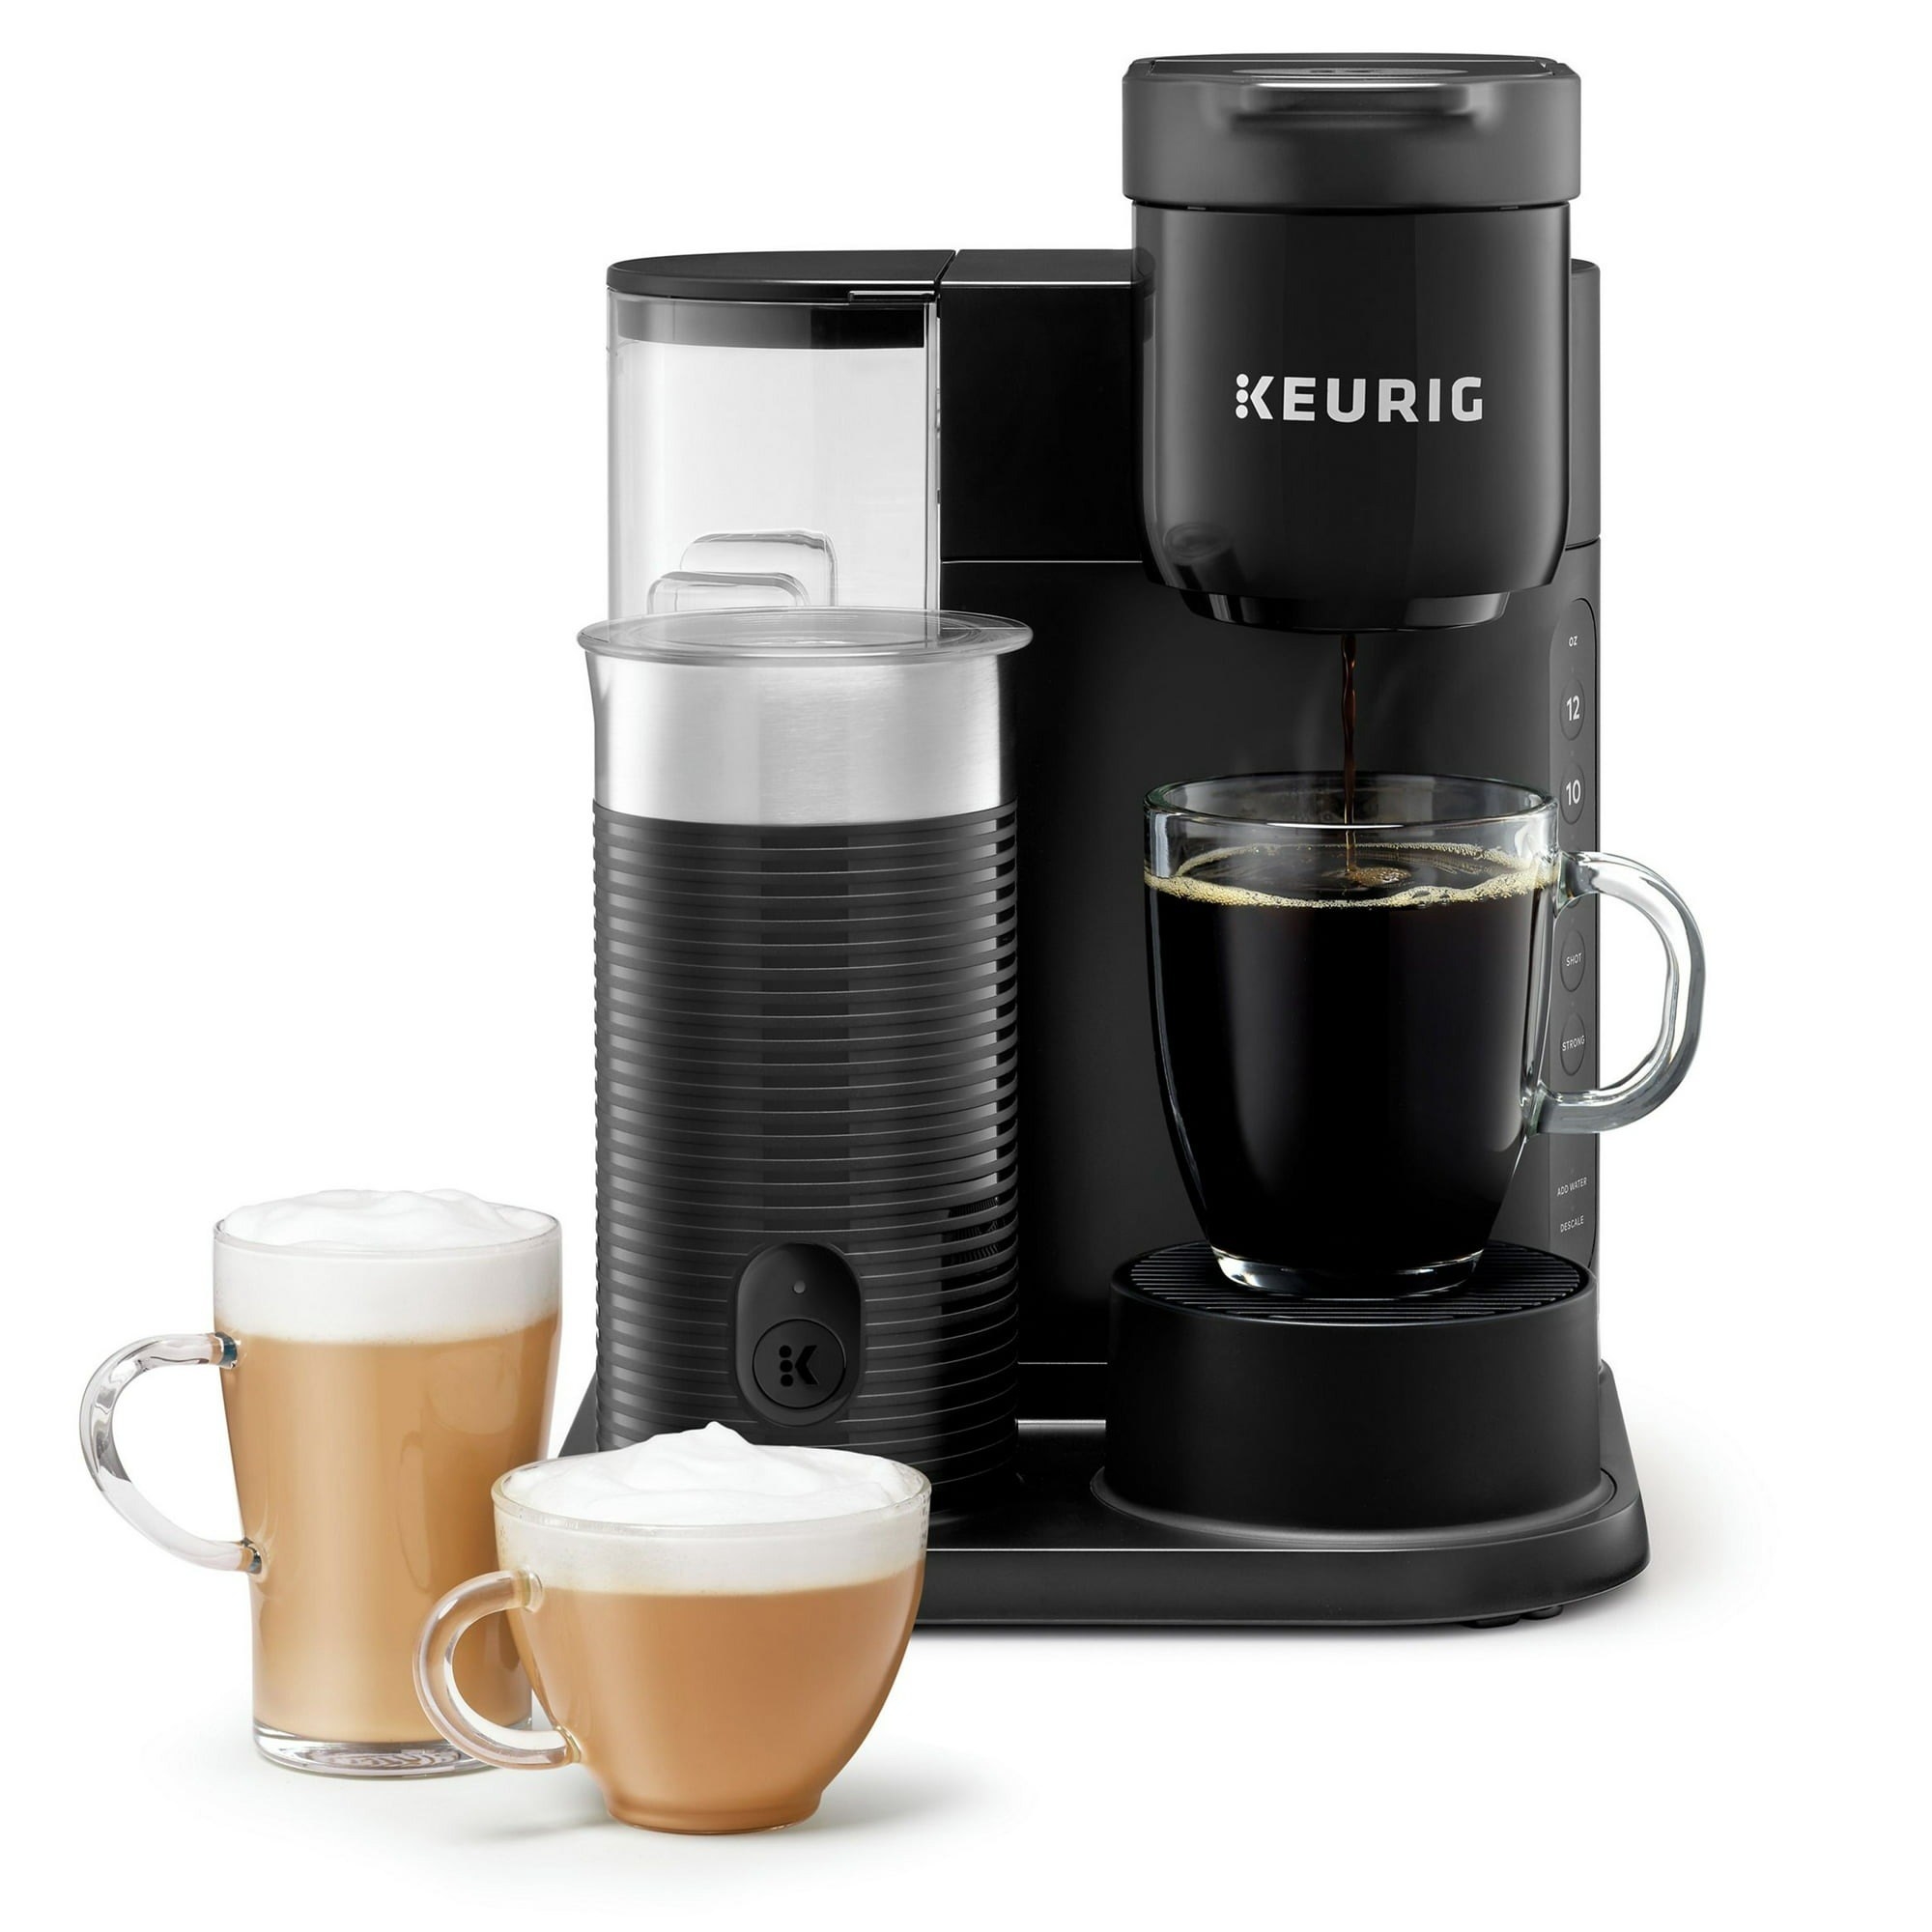 Black Keurig machine with two cappuccinos in front of it